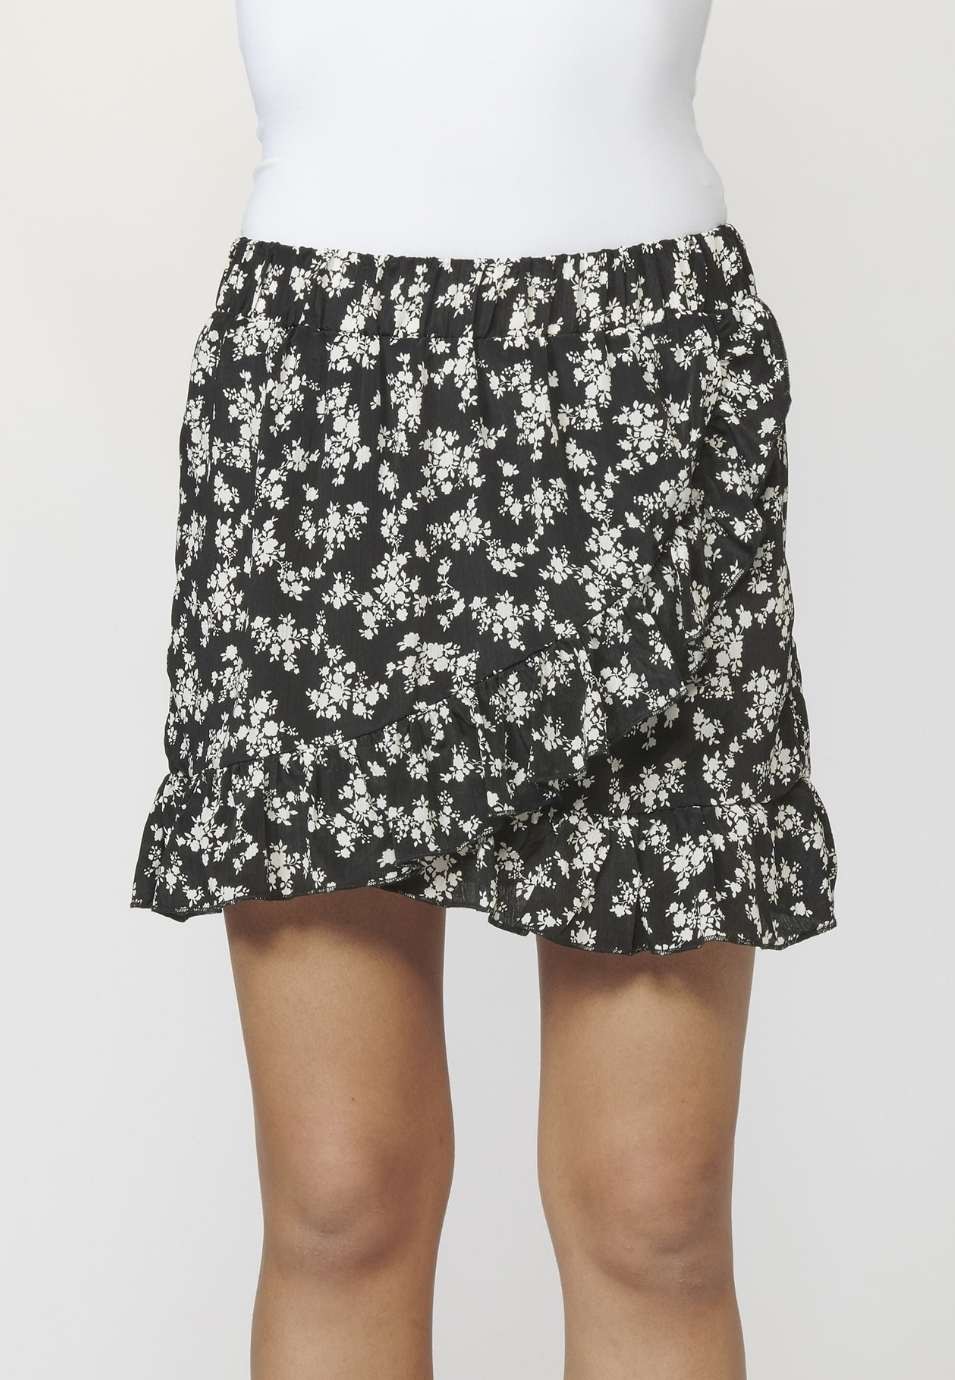 Black floral print skirt for Woman 5